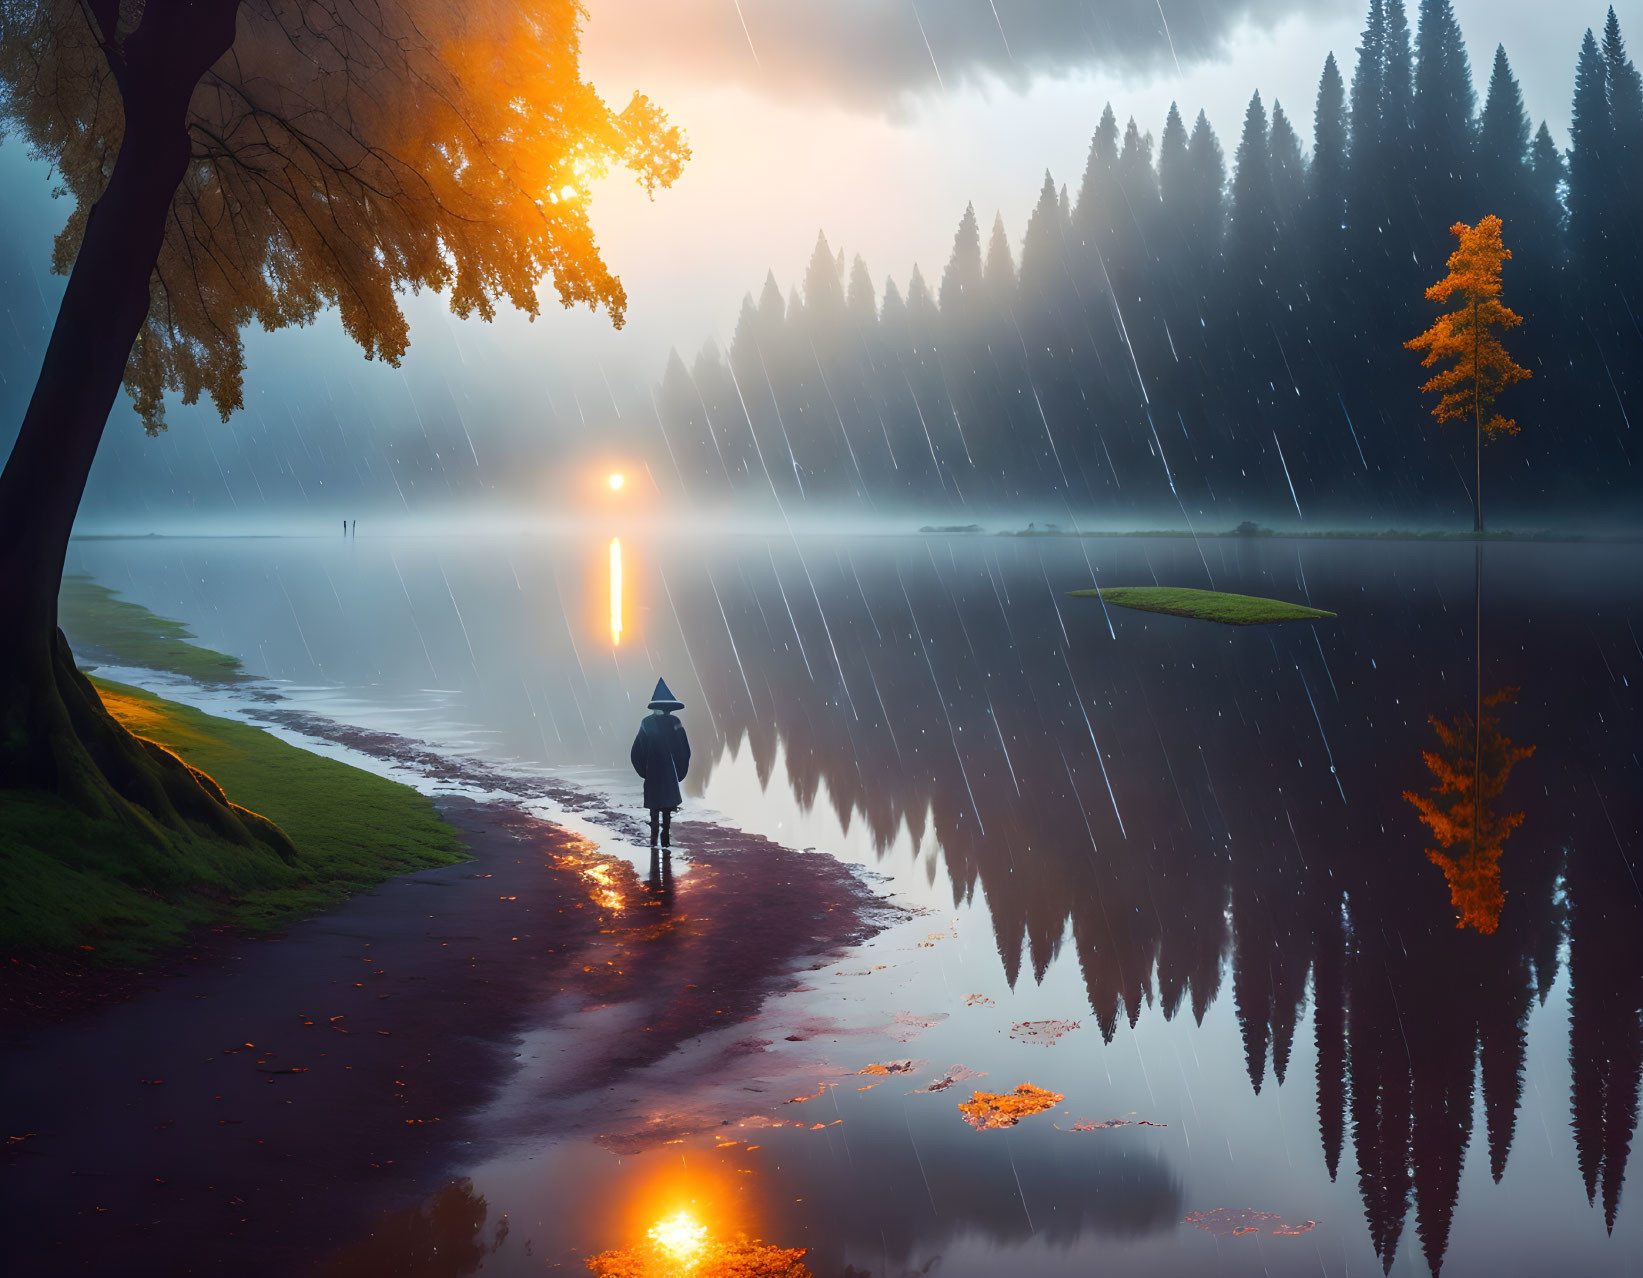 Autumn sunset reflected in tranquil lake with person holding umbrella